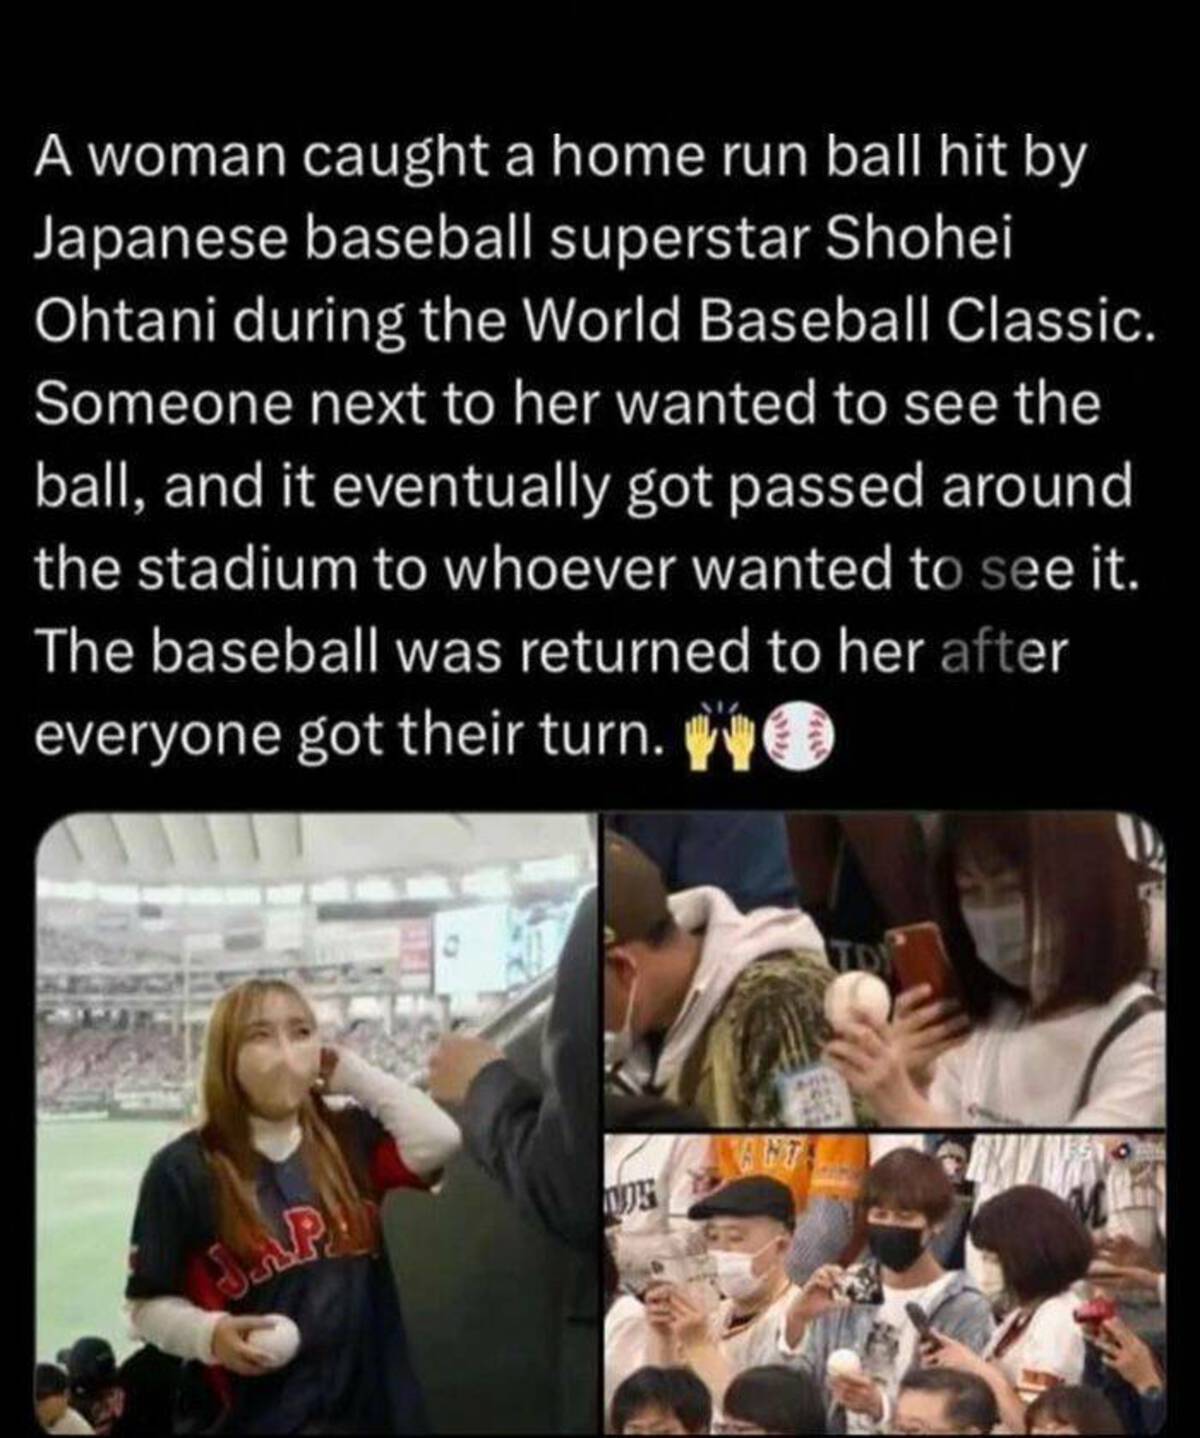 conversation - A woman caught a home run ball hit by Japanese baseball superstar Shohei Ohtani during the World Baseball Classic. Someone next to her wanted to see the ball, and it eventually got passed around the stadium to whoever wanted to see it. The 